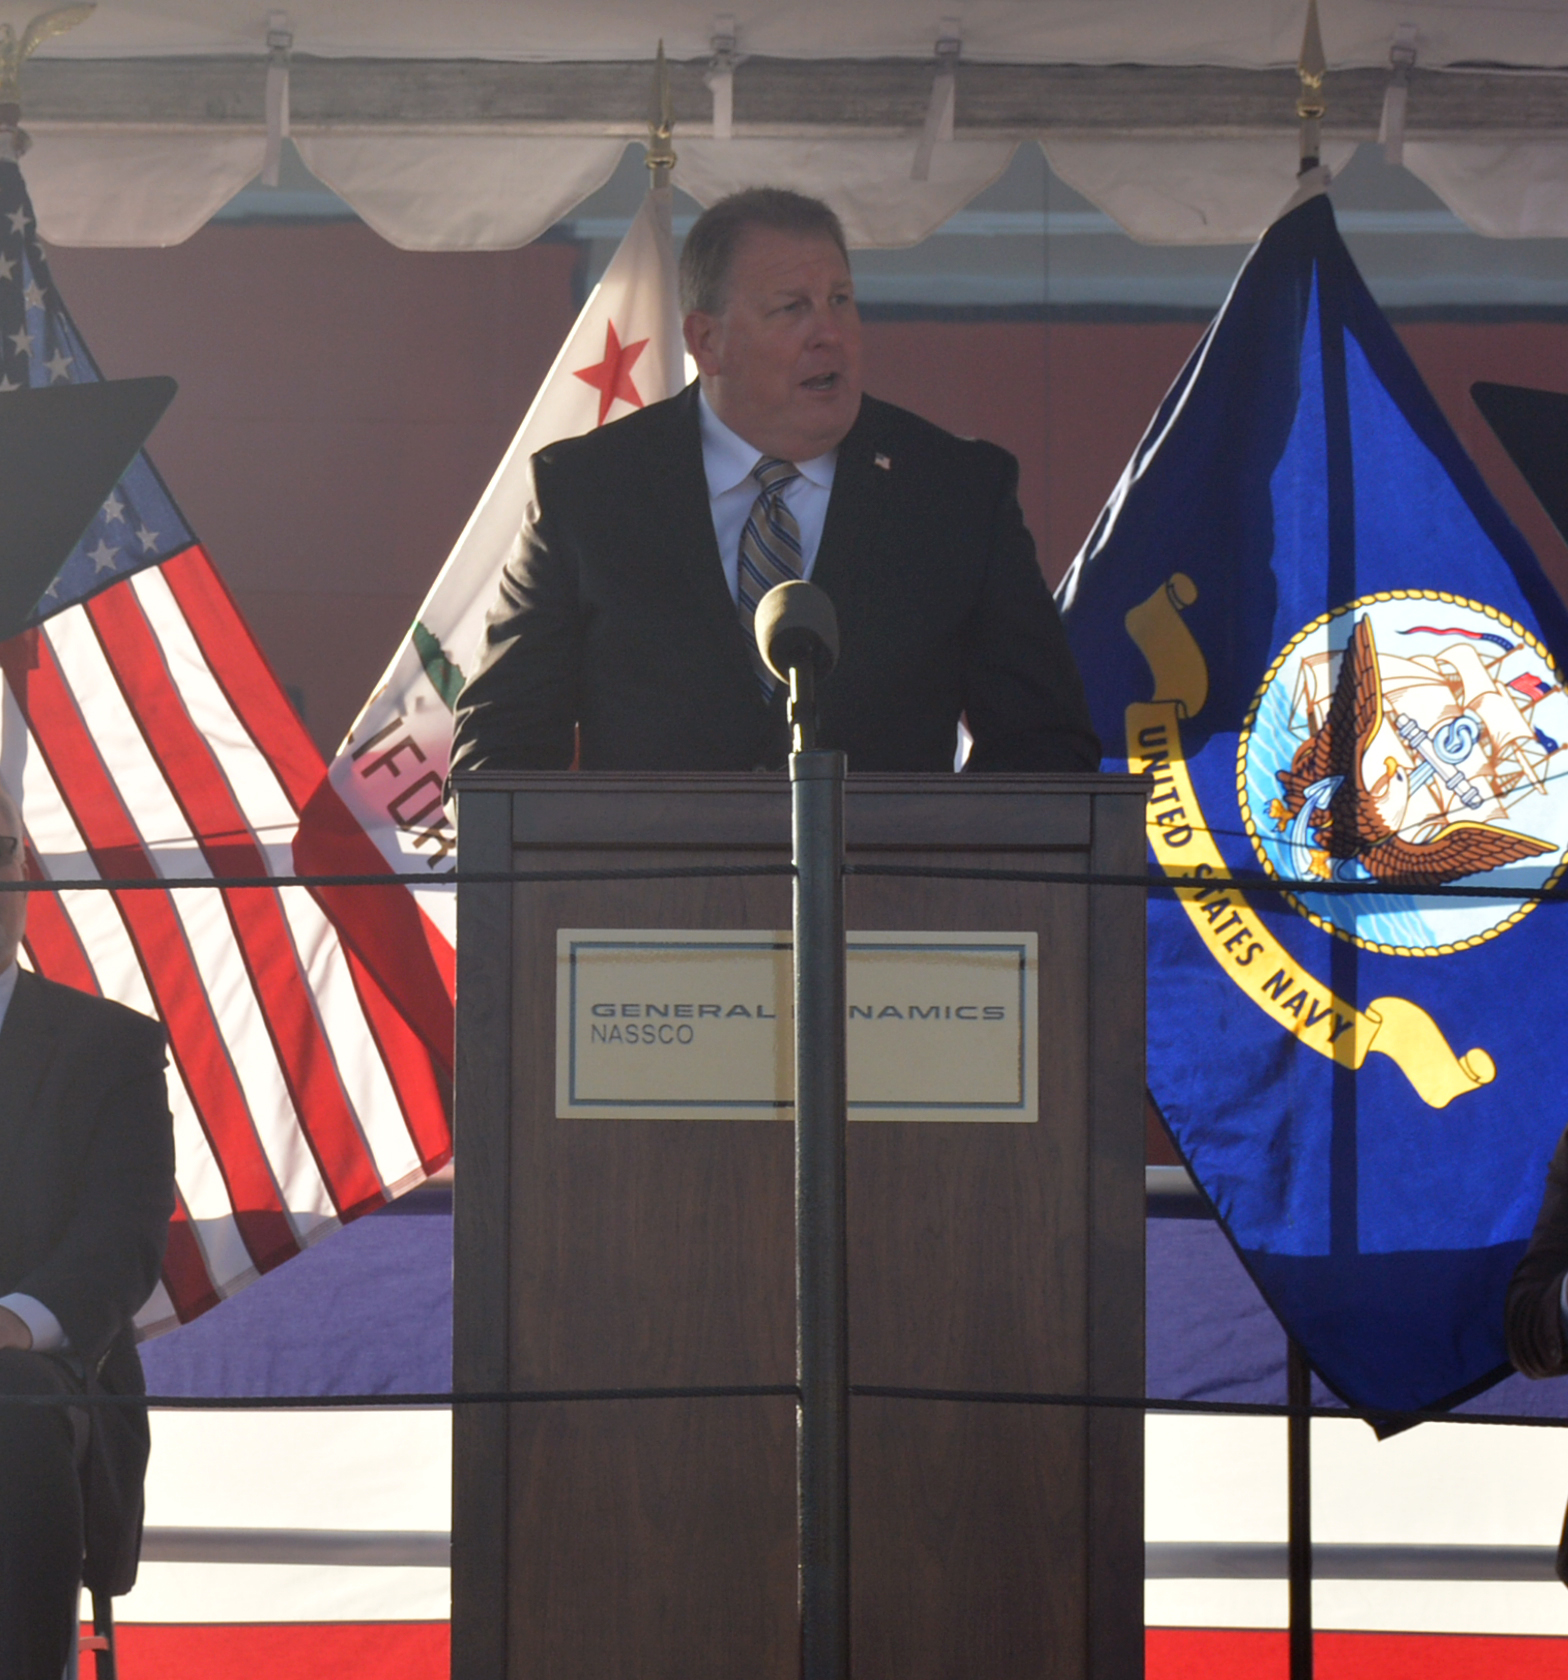 Steven Cade, Executive Director, Military Sealift Command, addresses the audience at the christening ceremony for MSC's newest ship USNS Robert F. Kennedy (T-AO 208) at the General Dynamics NASSCO shipyard in San Diego, Calif.